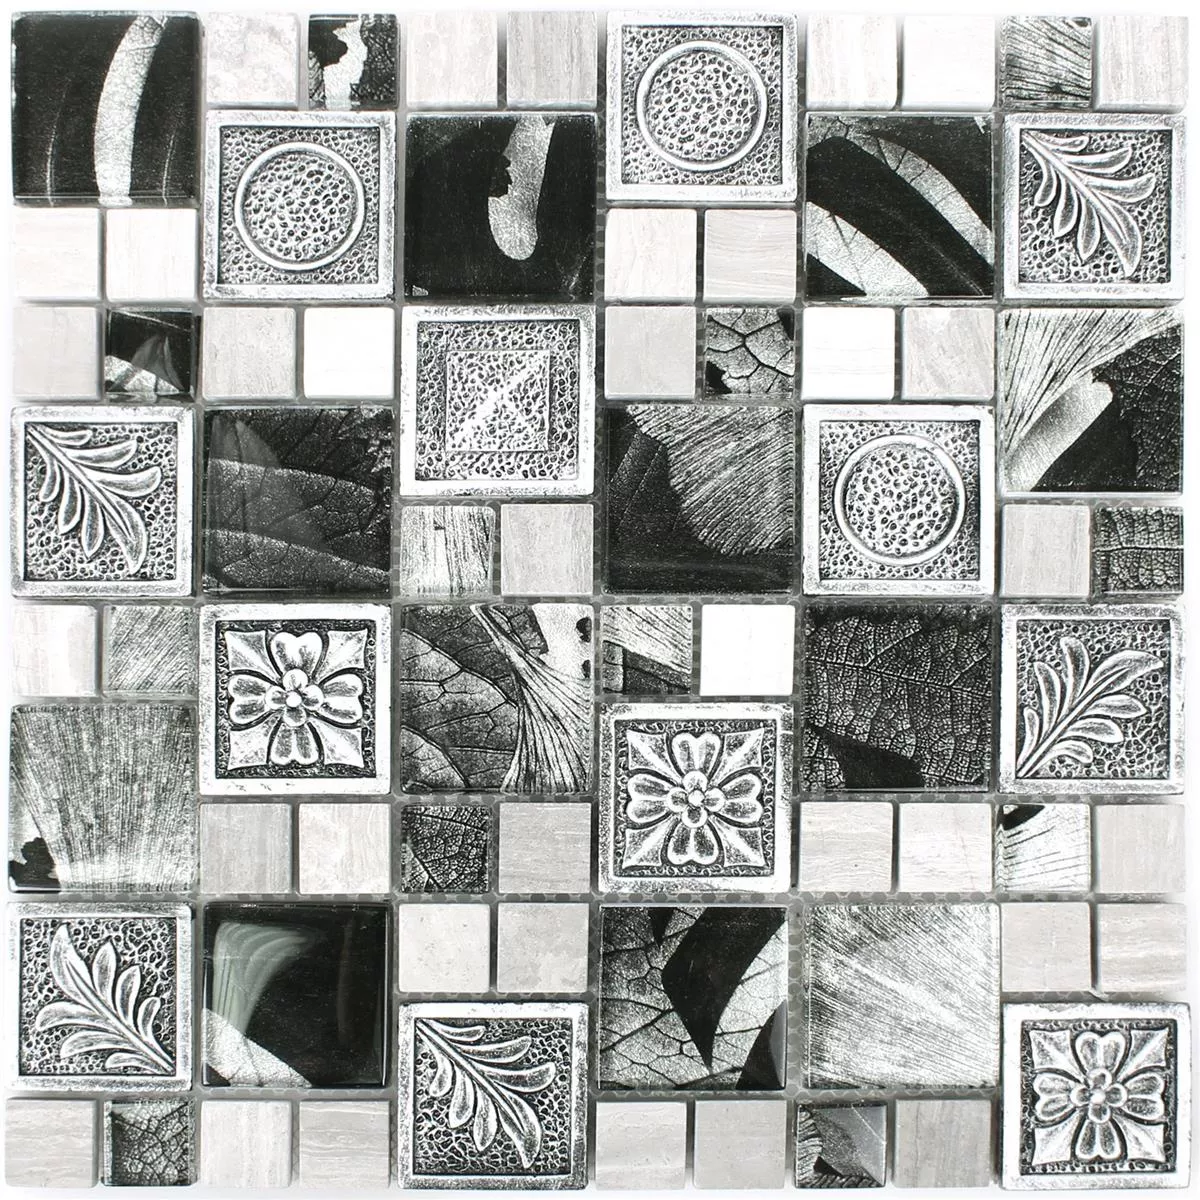 Sample Mosaic Tiles Levanzo Glass Resin Ornament Mix Silver